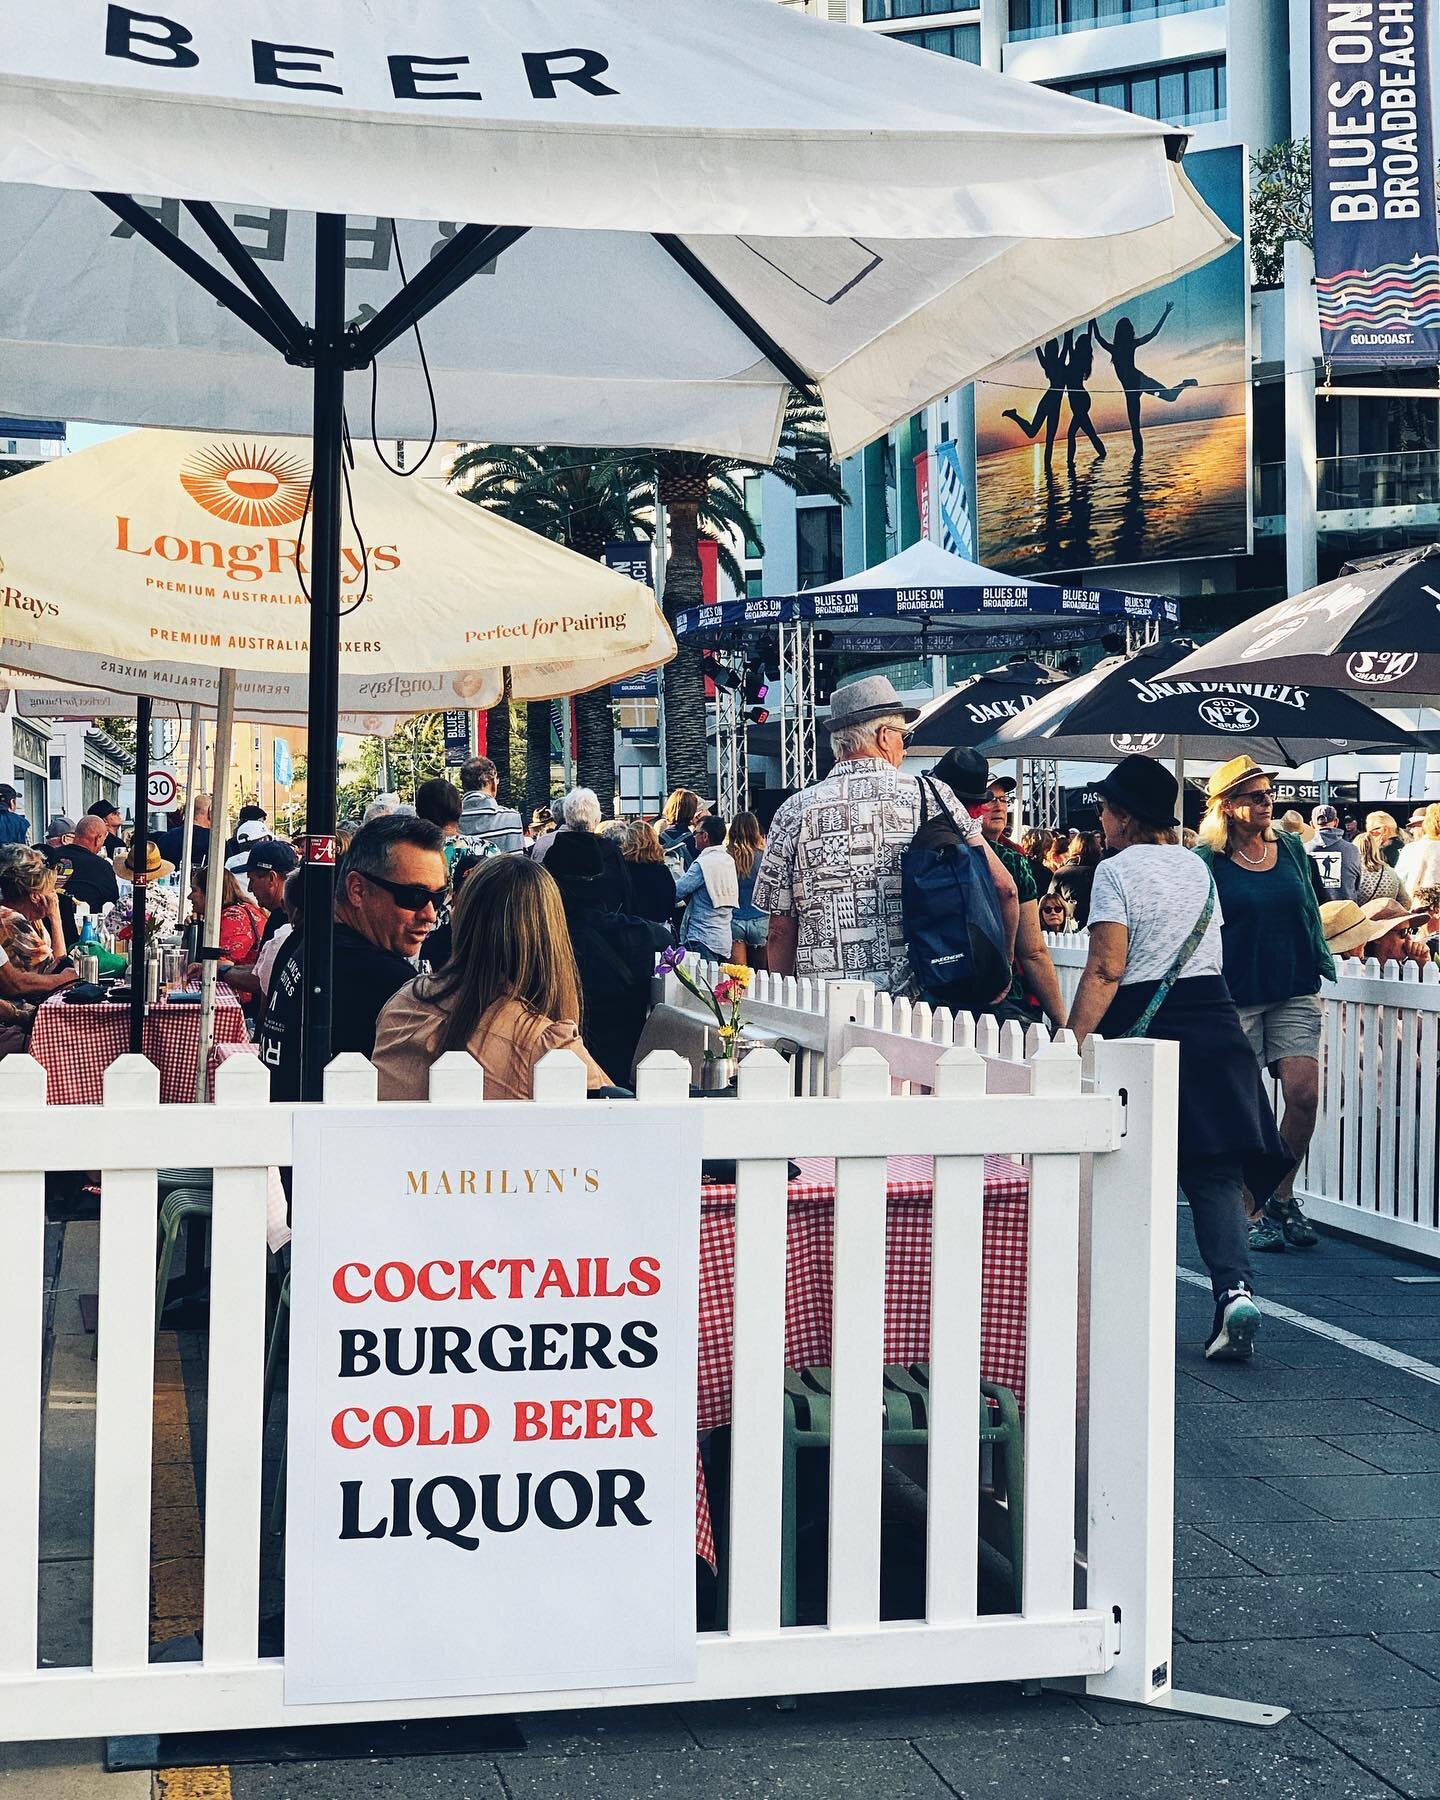 @bluesonbroadbeach has officially kicked off! Come hang by the stage and sip on some delicious drinks and grab a bite to eat!
.
.
.
.
#goldcoast #destinationgoldcoast #cocktails #bluesonbroadbeach #bluesmusic #marilyns #marilynsgc #marilynsbar #maril